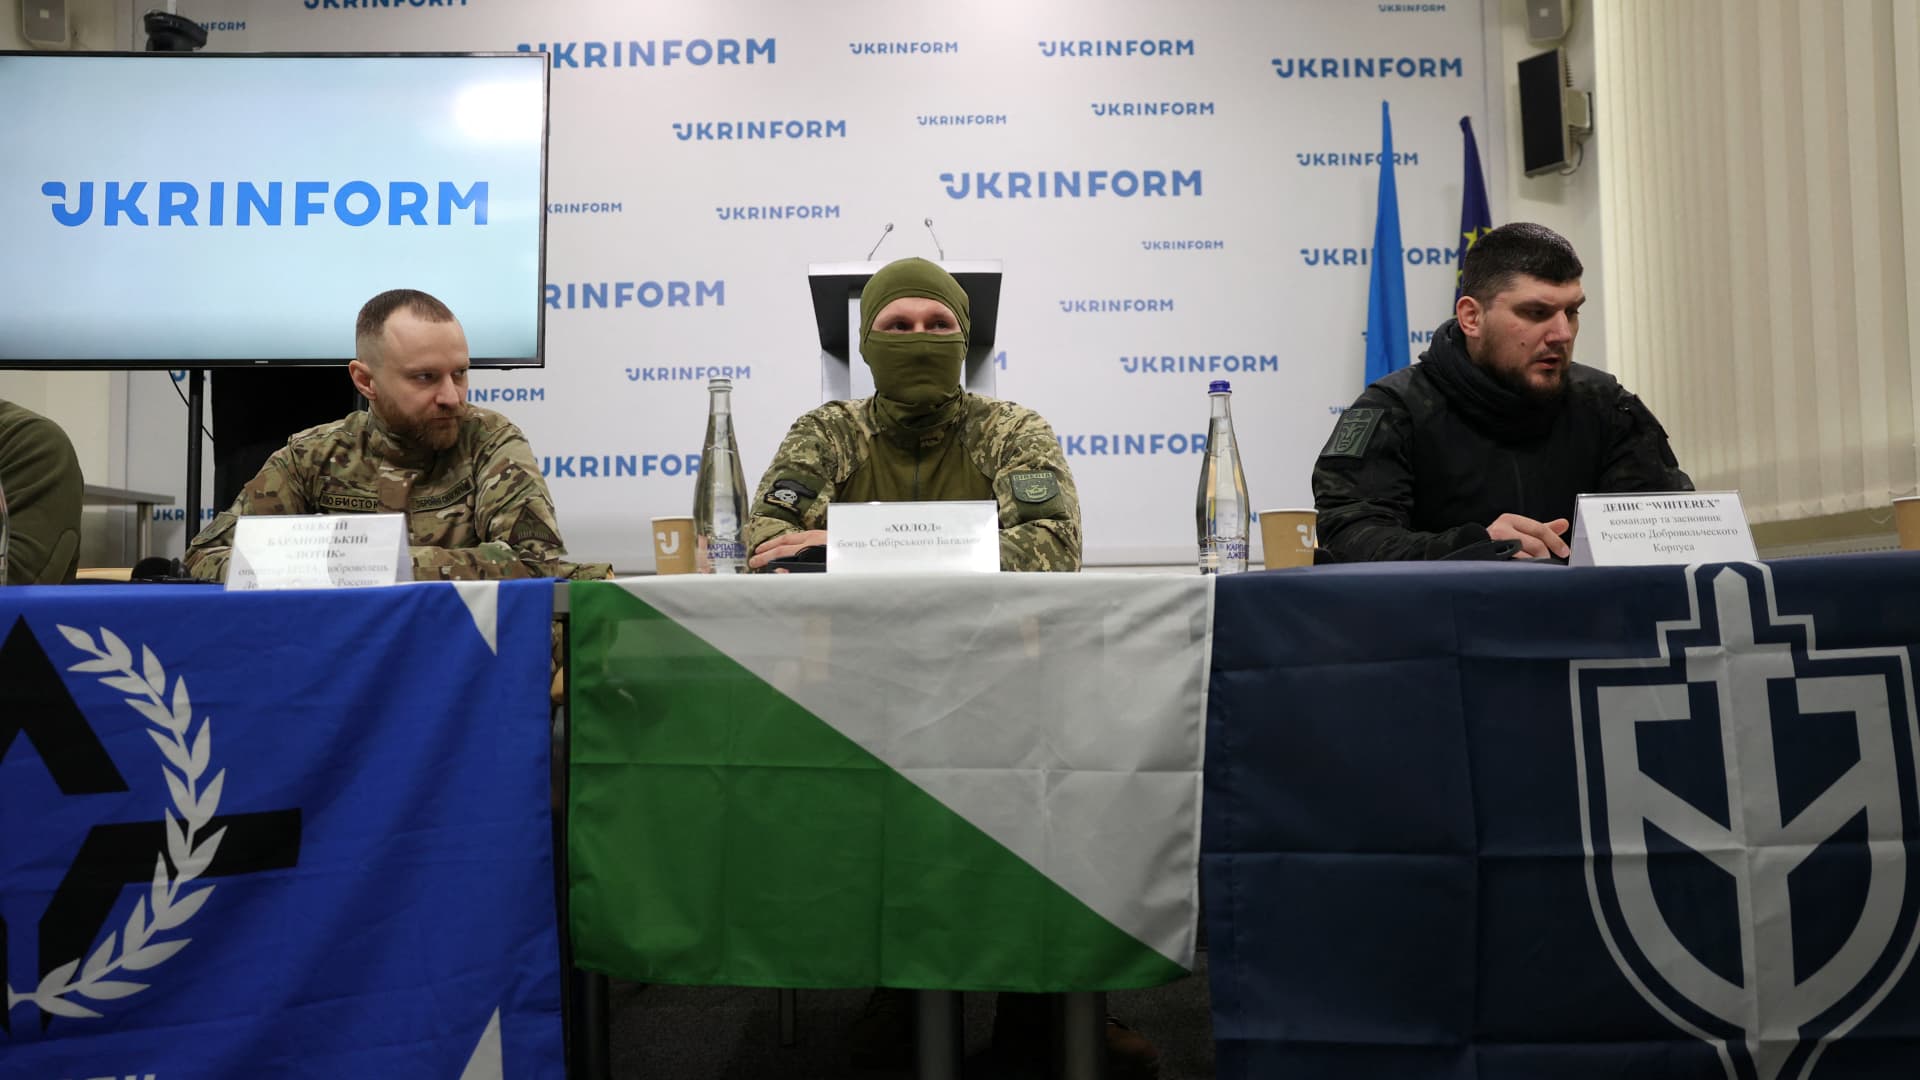 Oleksiy Baranovsky 'Lyutik', Unmanned Aerial Vehicle Operator (UAV) operator, and 'Freedom of Russia' legion volunteer (L), 'Holod' a fighter in the 'Siberian Battalion' (C), and the commander and founder of the Russian Volunteer Corps, Denis 'Whiterex' (R), take part in the press conference on behalf of the Russian Liberation Forces fighting on the Ukrainian side, in Kyiv on March 21, 2024, amid the Russian invasion of Ukraine.